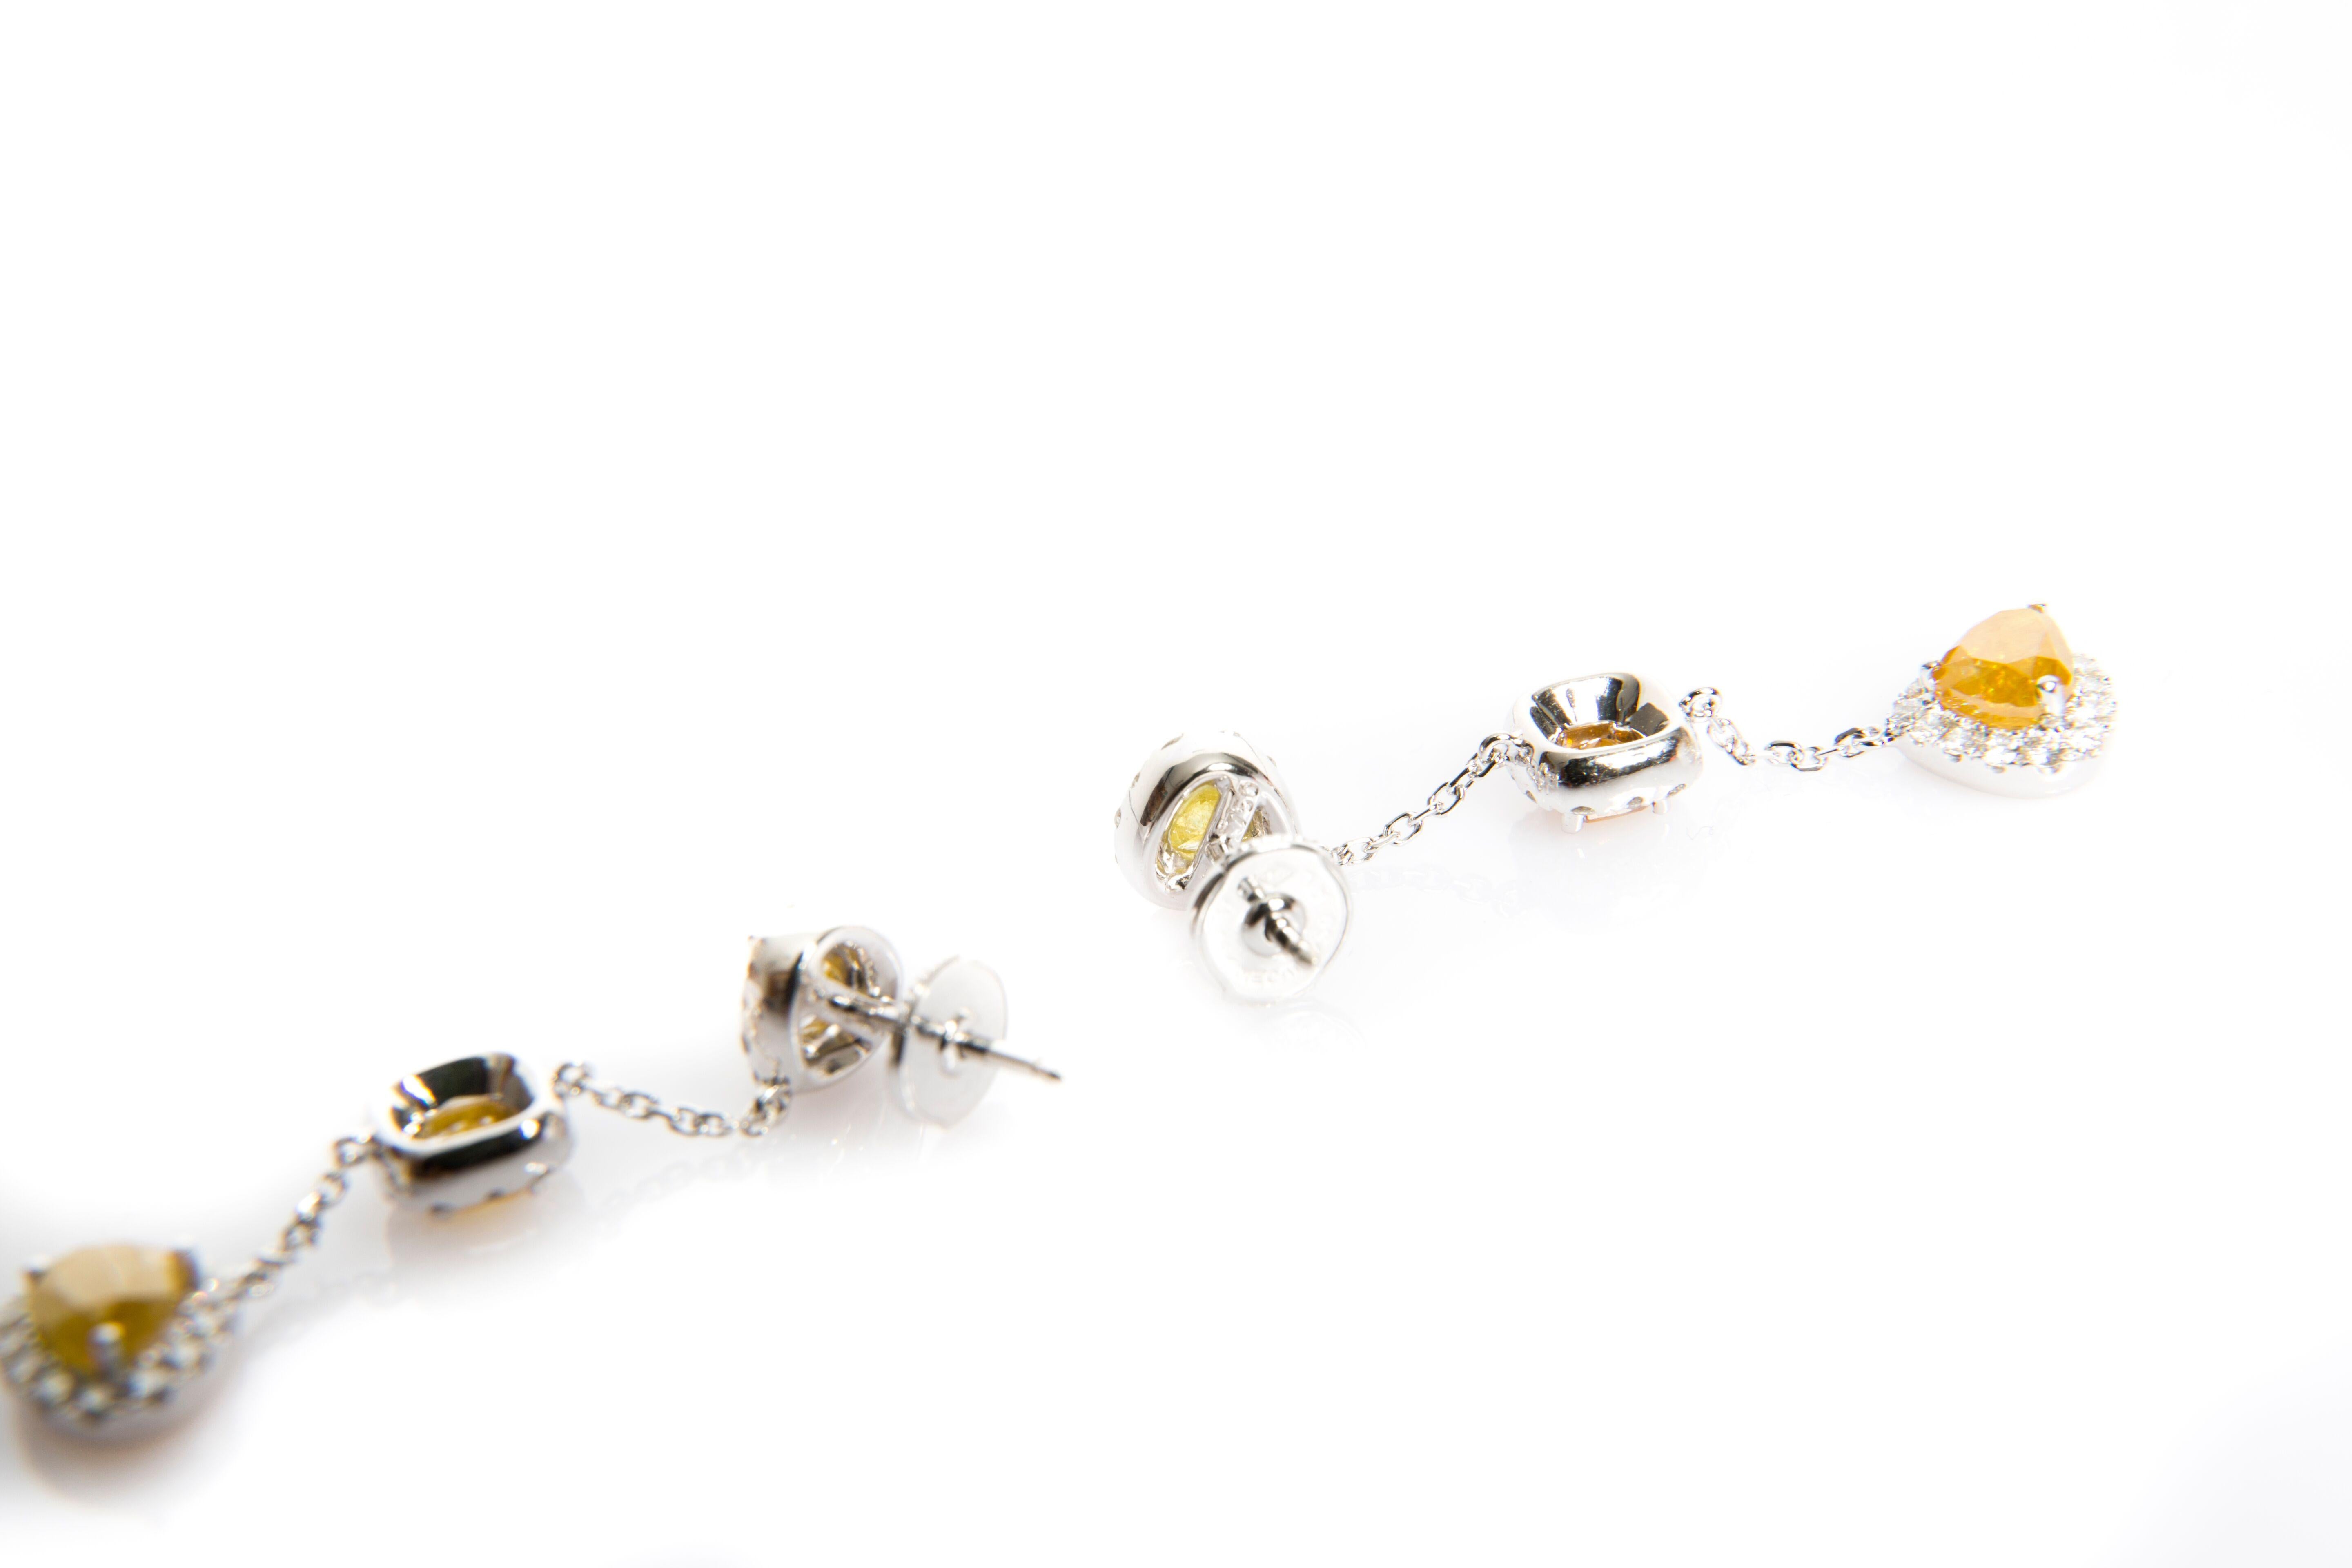 These handcrafted pair of earrings are lovingly handmade with yellow, brown and white diamonds (total 4.81 cts) mounted in 18K white gold.
Very elegant summery design for cocktail dresses or casual days outfits; these earrings will leave your